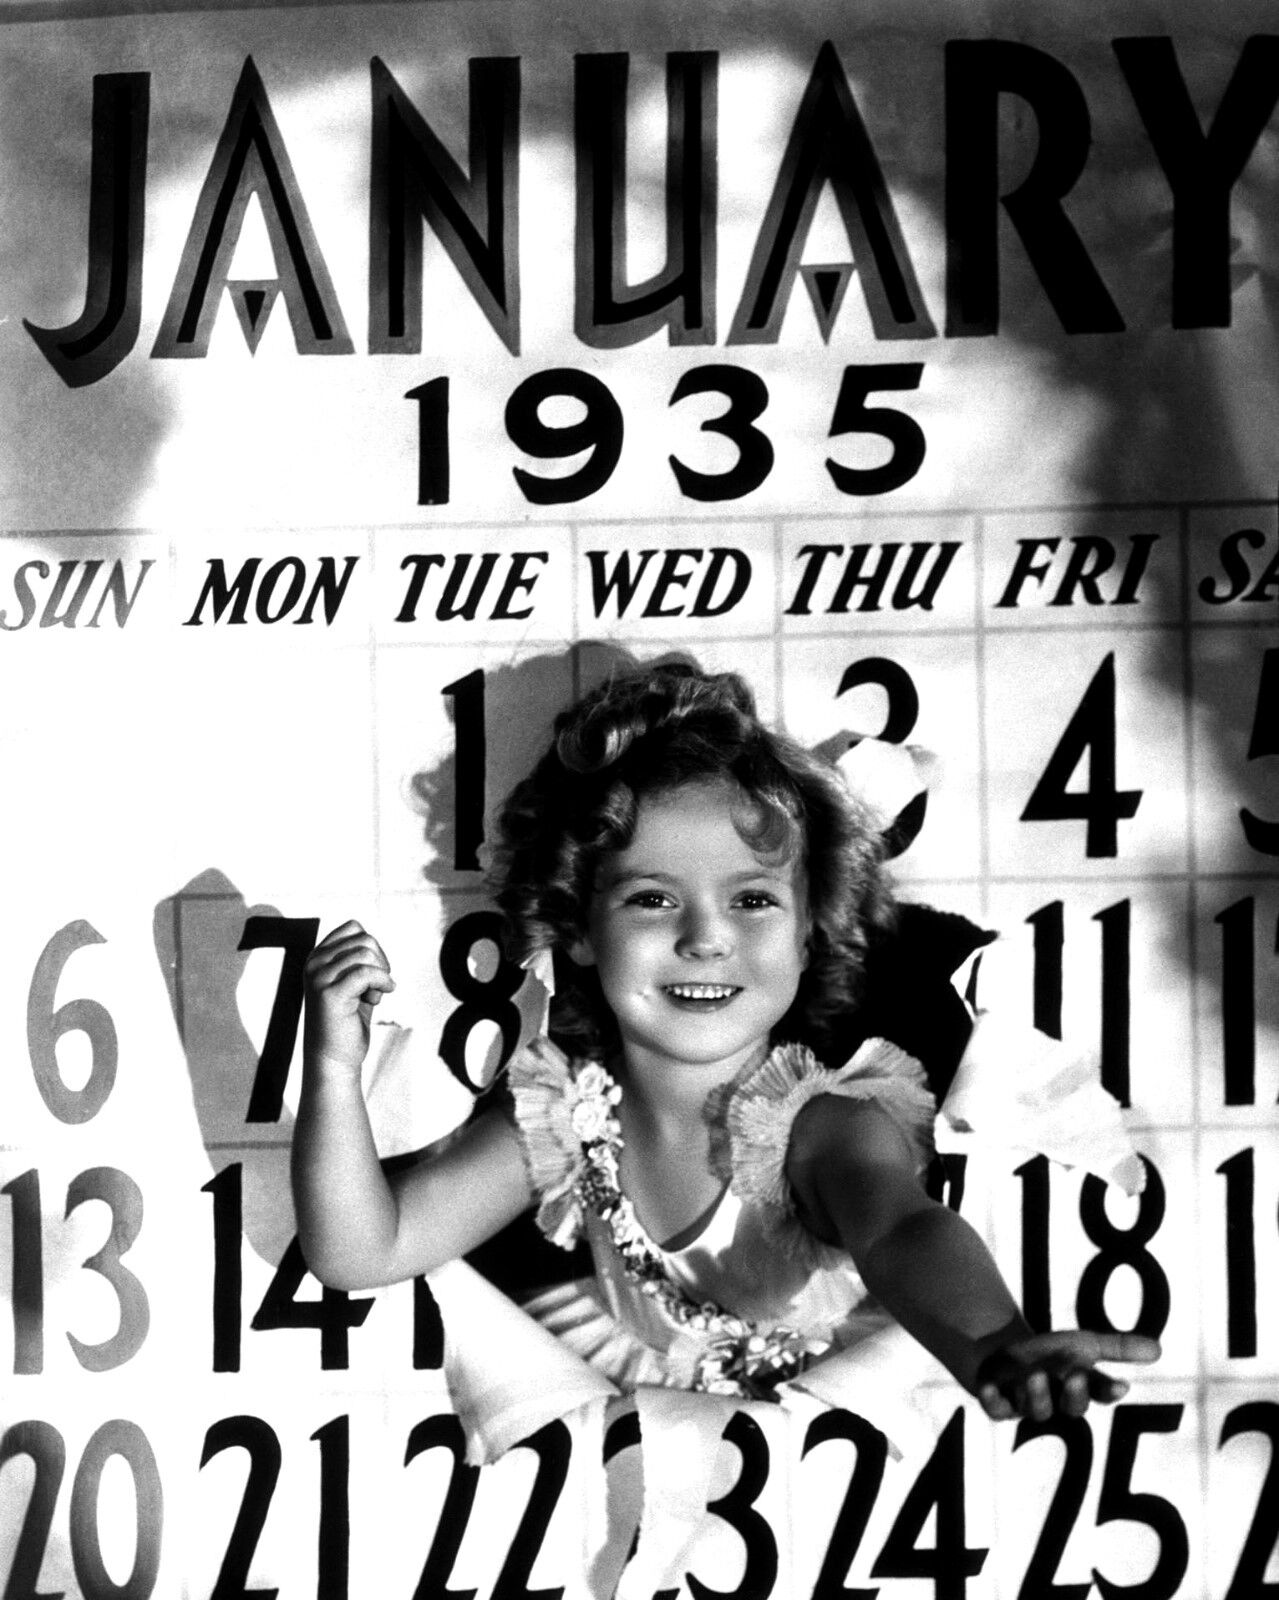 ACTRESS SHIRLEY TEMPLE WELCOMES THE NEW YEAR 1935  8X10 PUBLICITY PHOTO (DA-047)